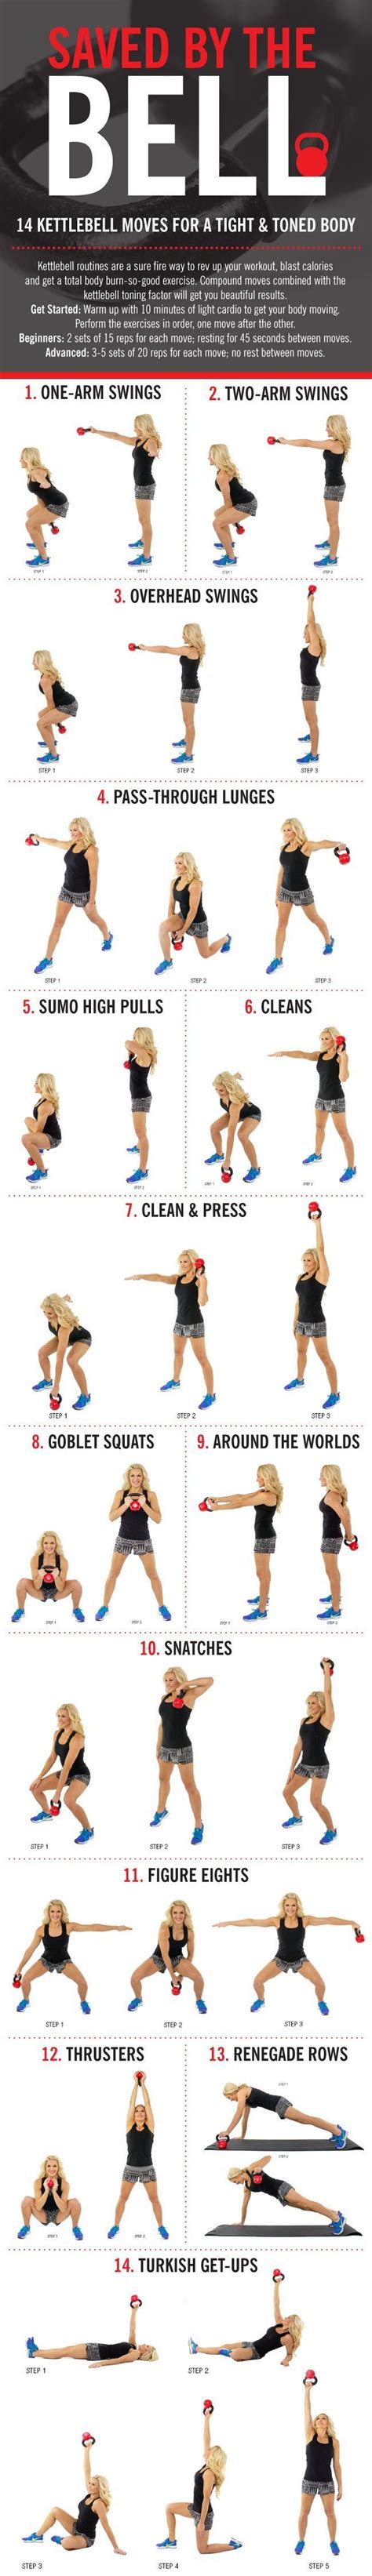 14 Kettlebell Moves For An All Over Body Calorie Torcher